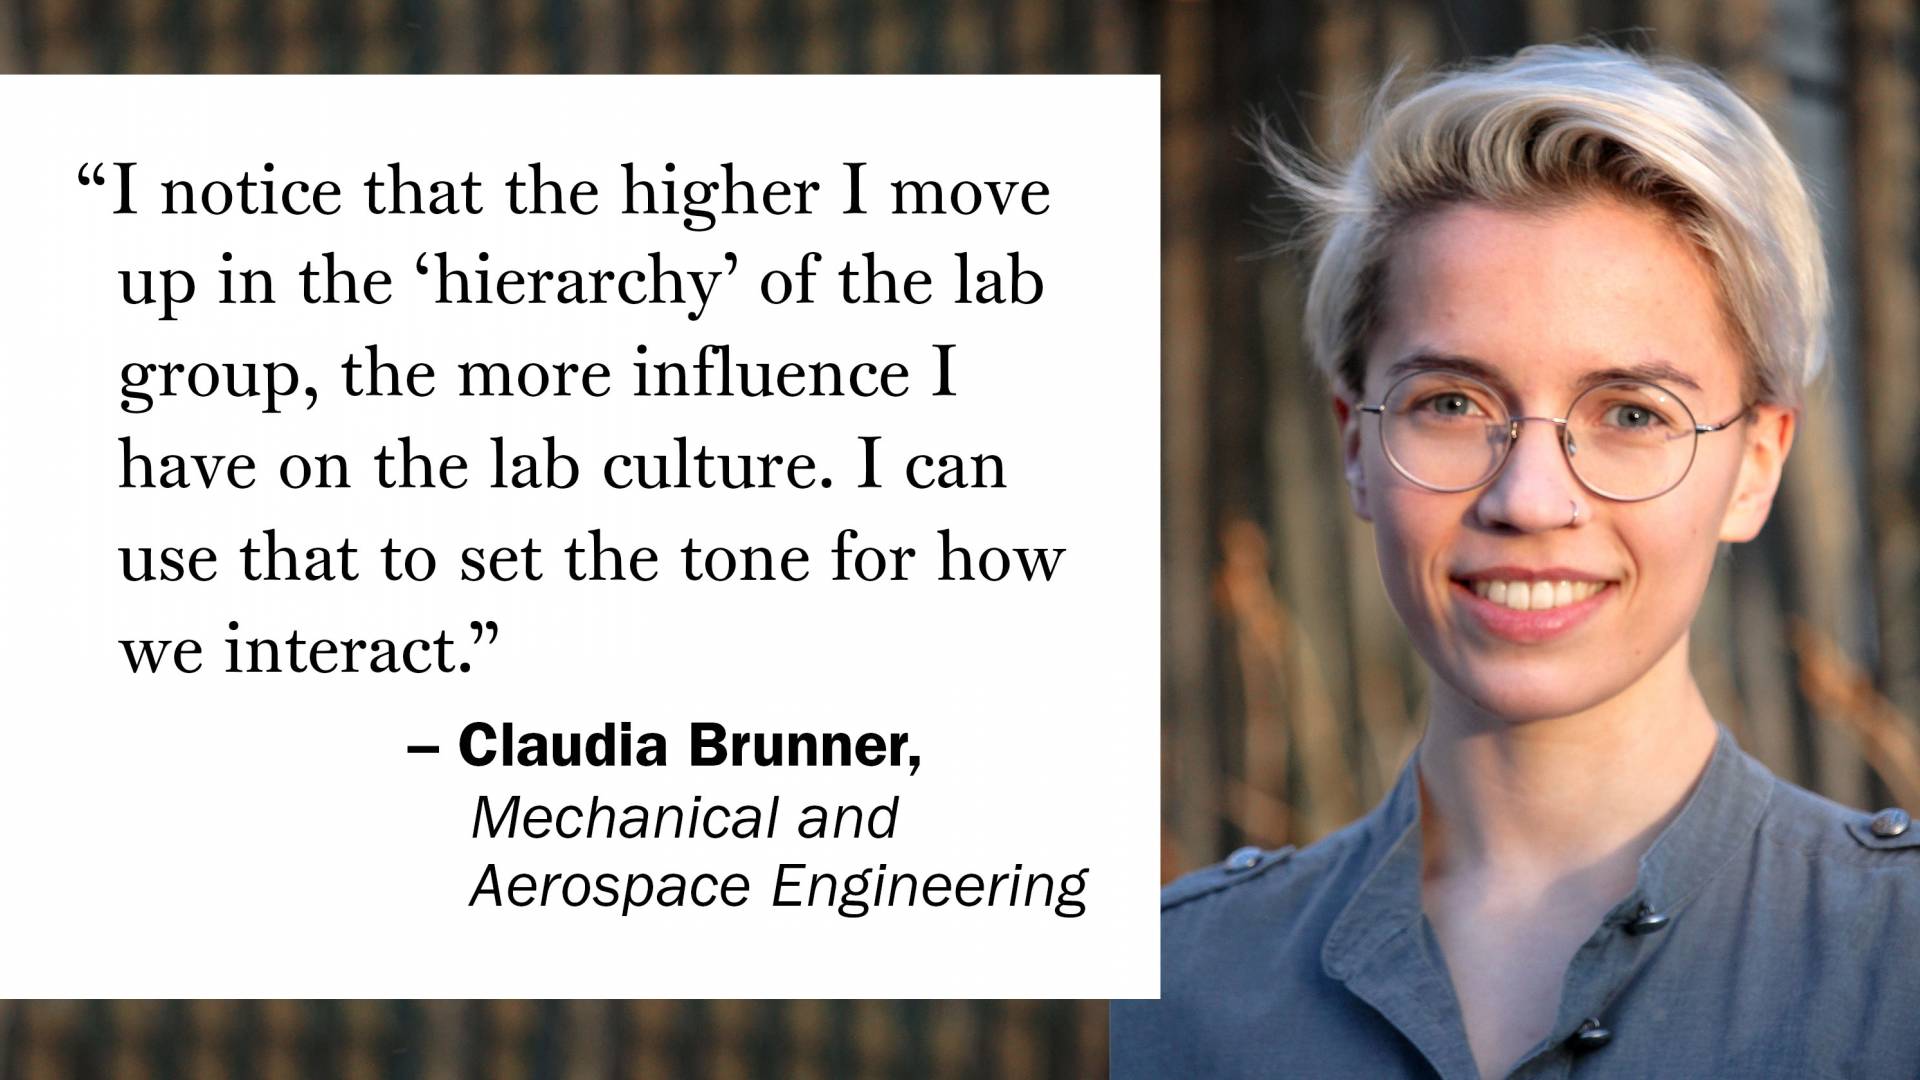 "I notice that the higher I move up in the ‘hierarchy’ of the lab group, the more influence I have on the lab culture. I can use that to set the tone for how we interact." —Claudia Brunner, Mechanical and Aerospace Engineering